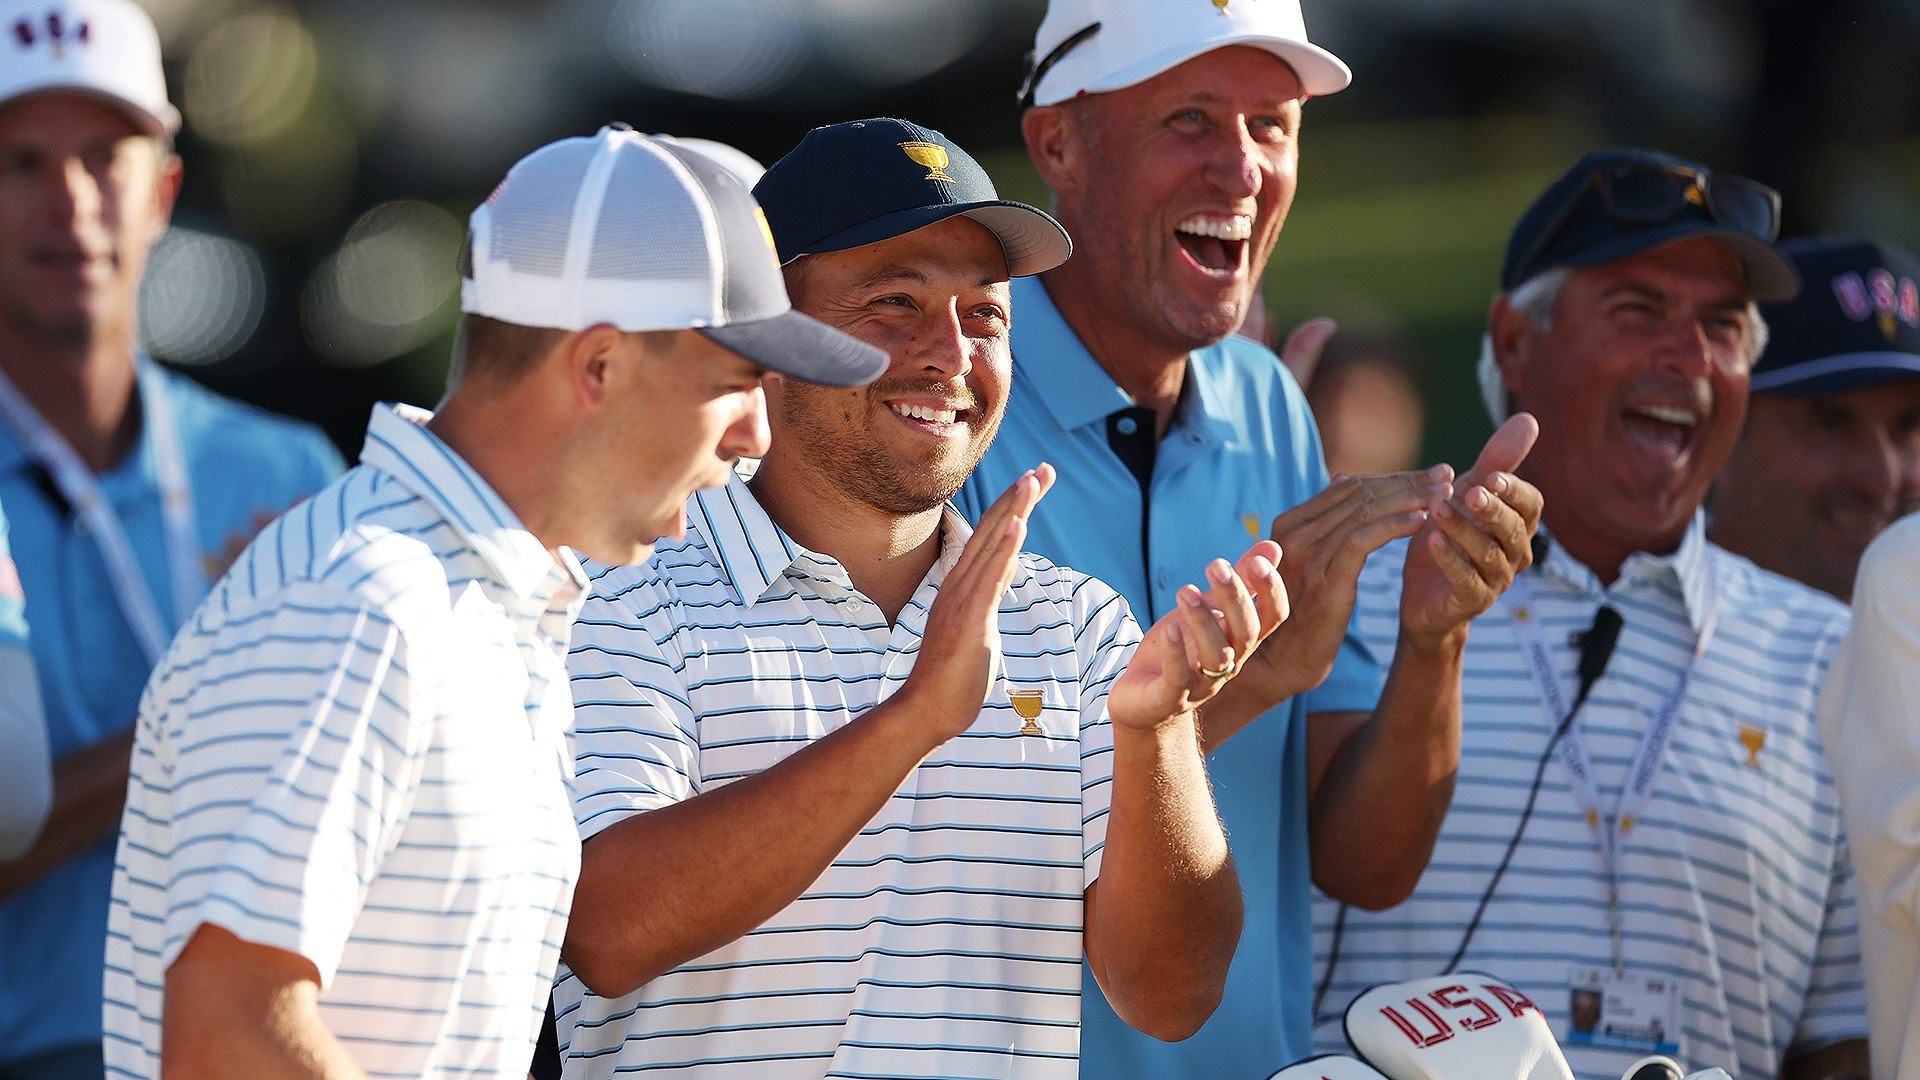 Golf Central Podcast: Will U.S. win the Presidents Cup on Saturday?